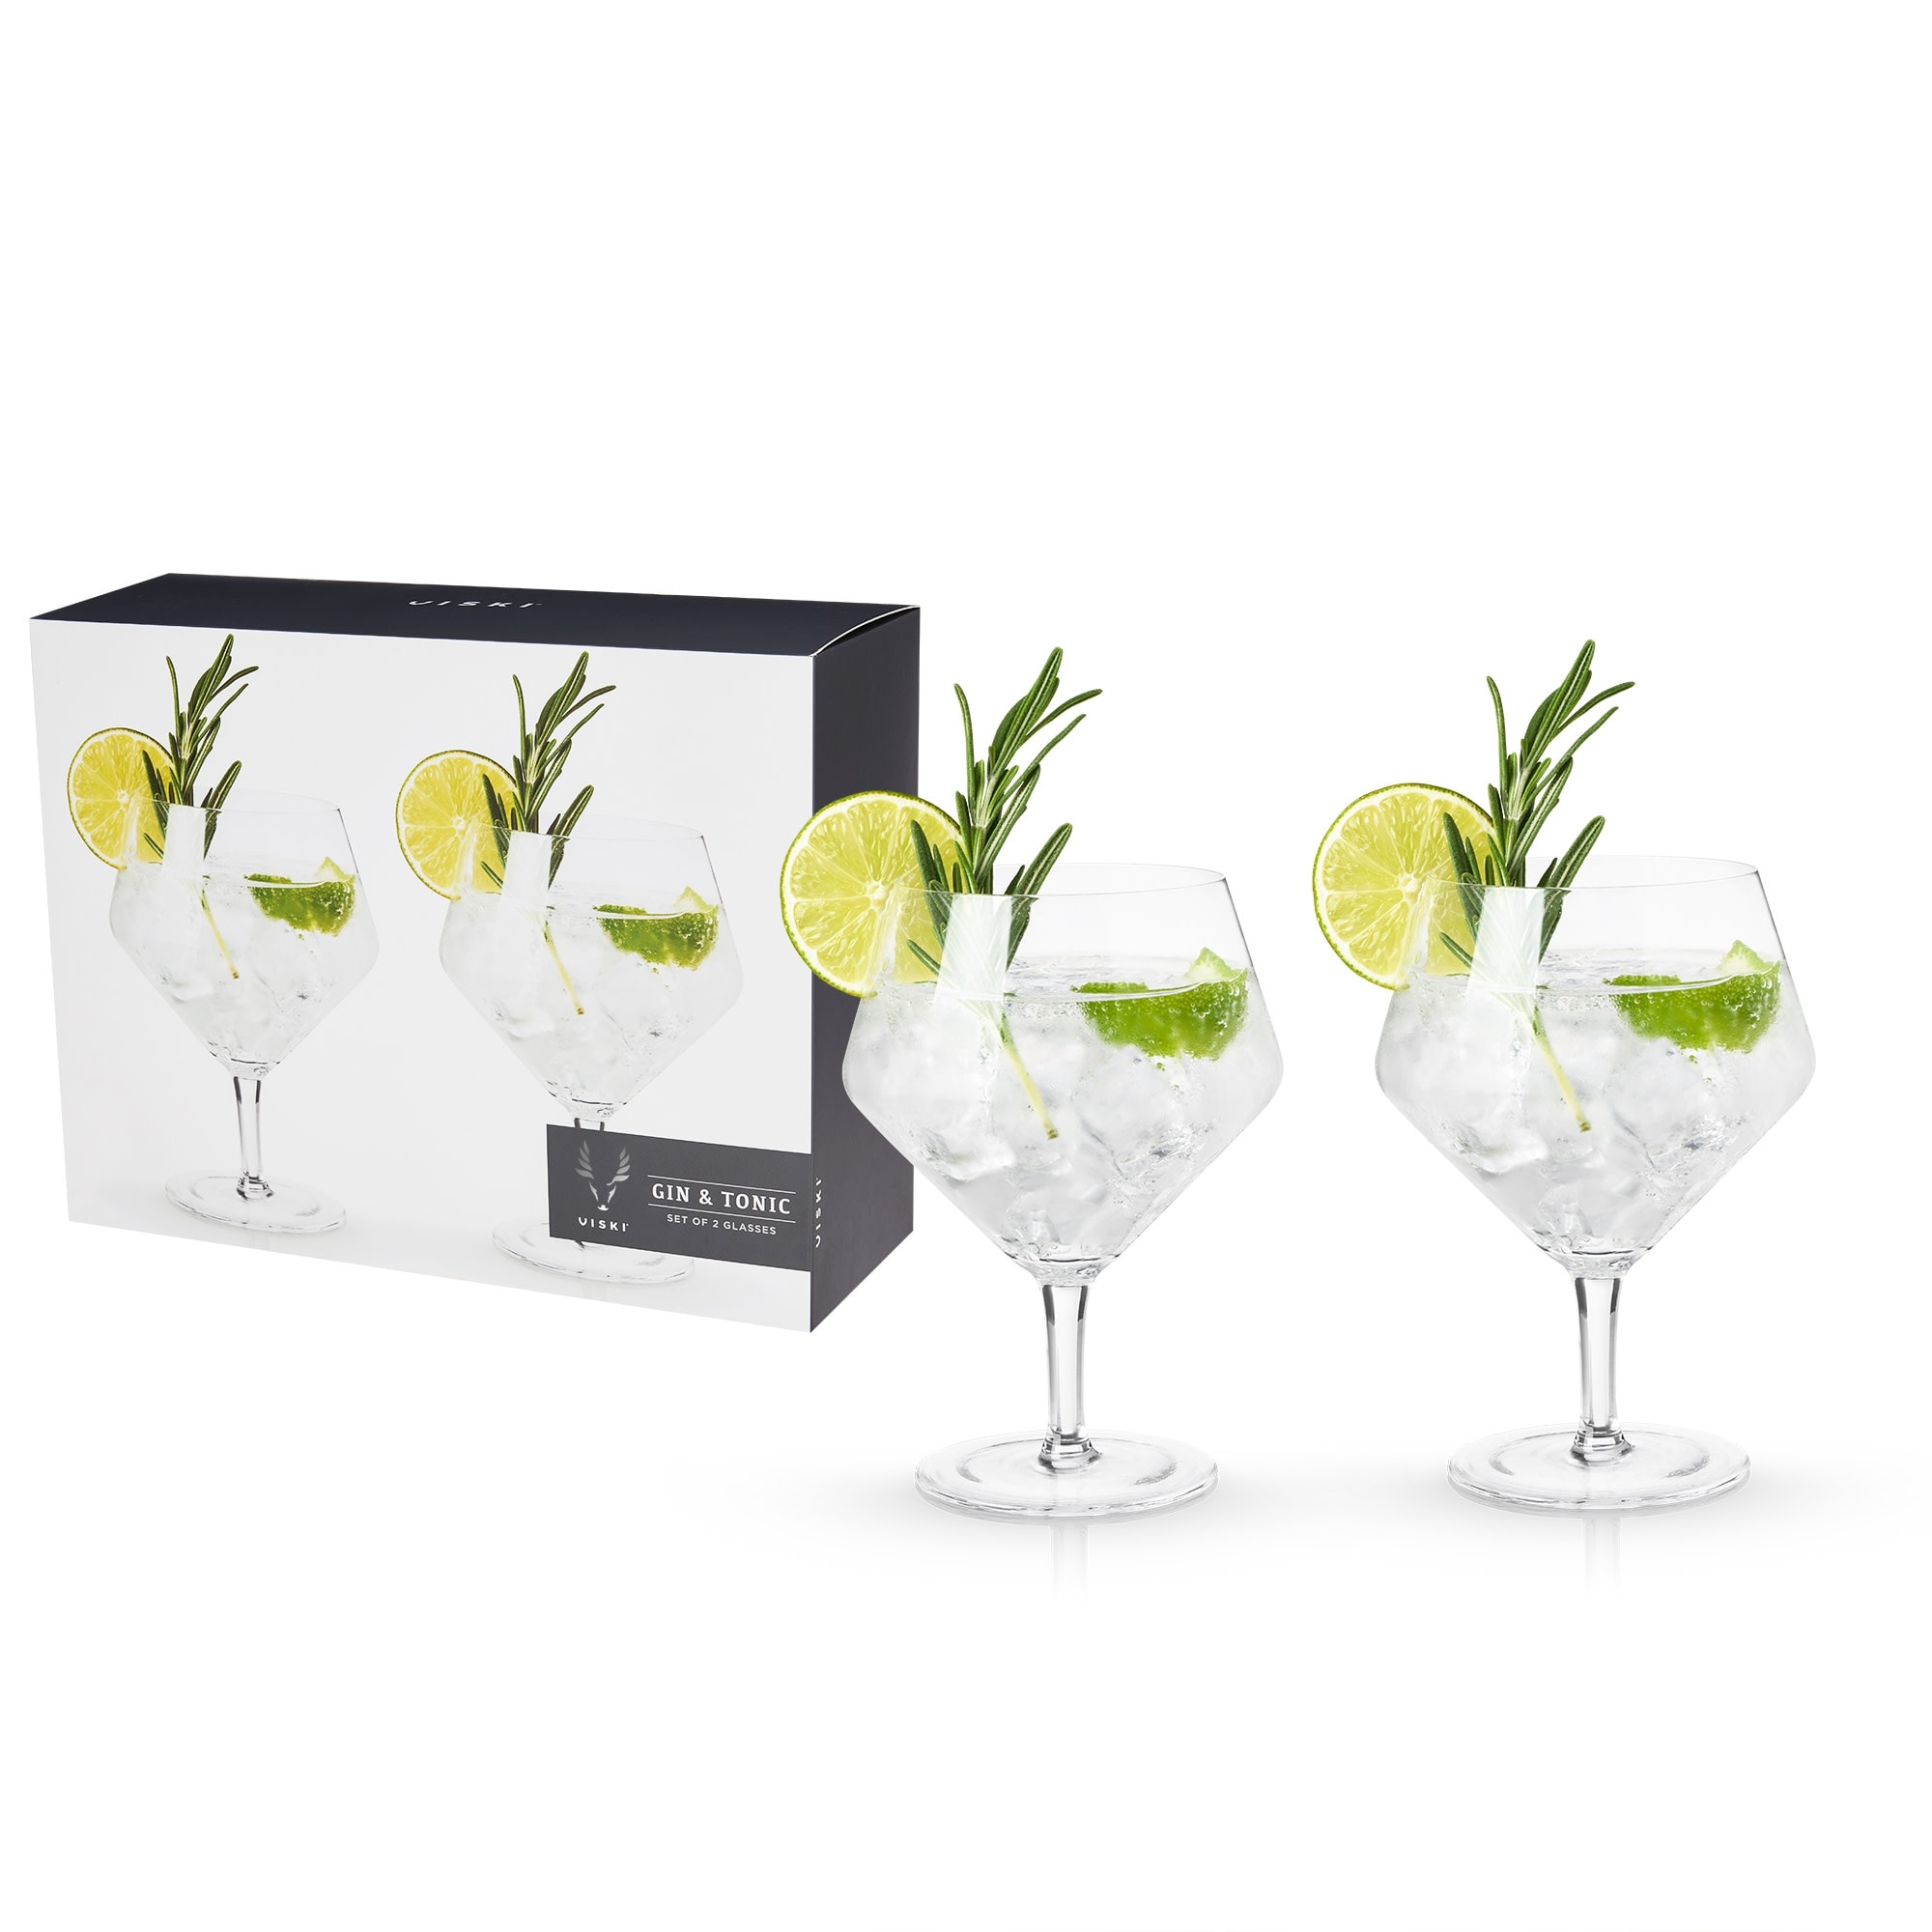 https://ak1.ostkcdn.com/images/products/is/images/direct/c87cc0fe92ced9851973d282d0ffc27d1d081681/Angled-Crystal-Gin-%26-Tonic-Glasses-by-Viski.jpg